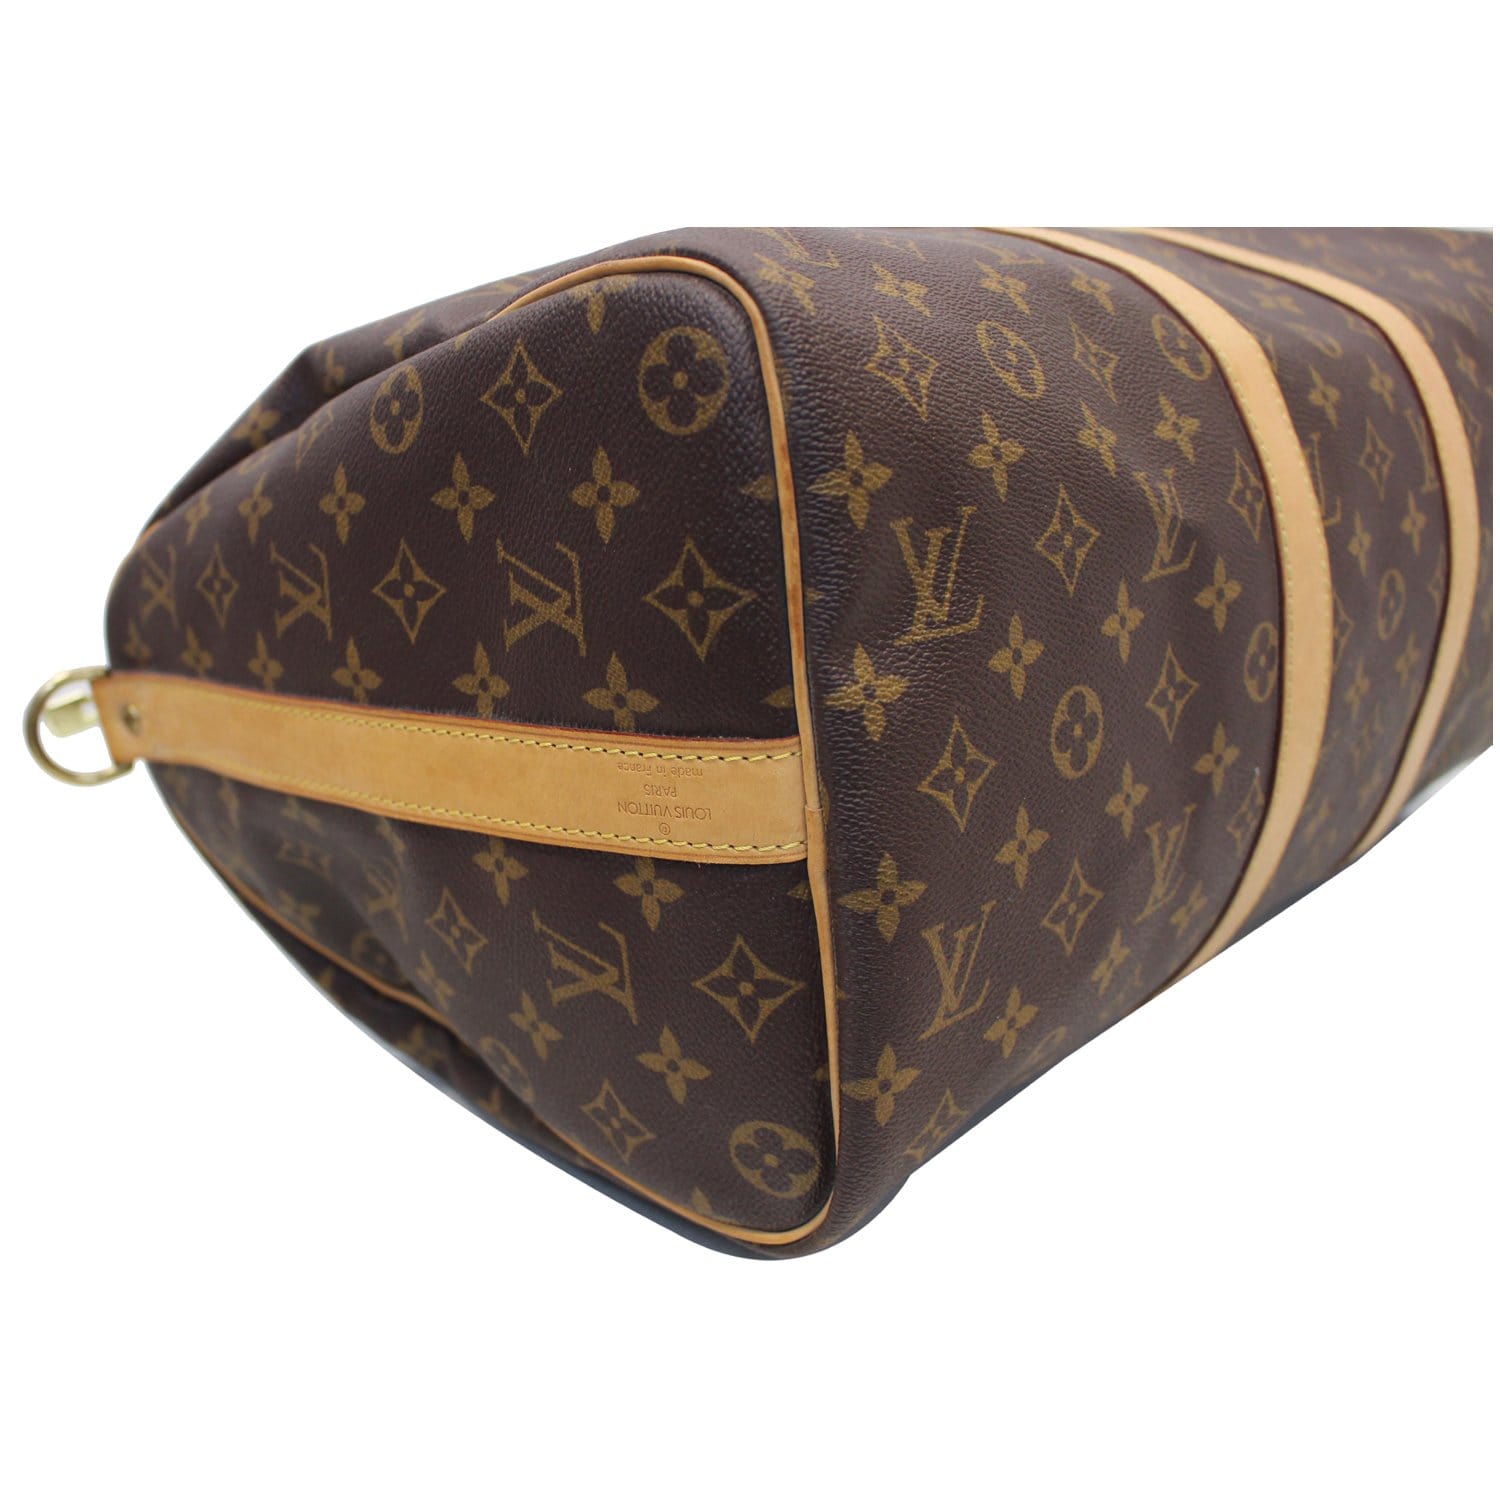 Louis Vuitton travel bag in anthracite grey canvas